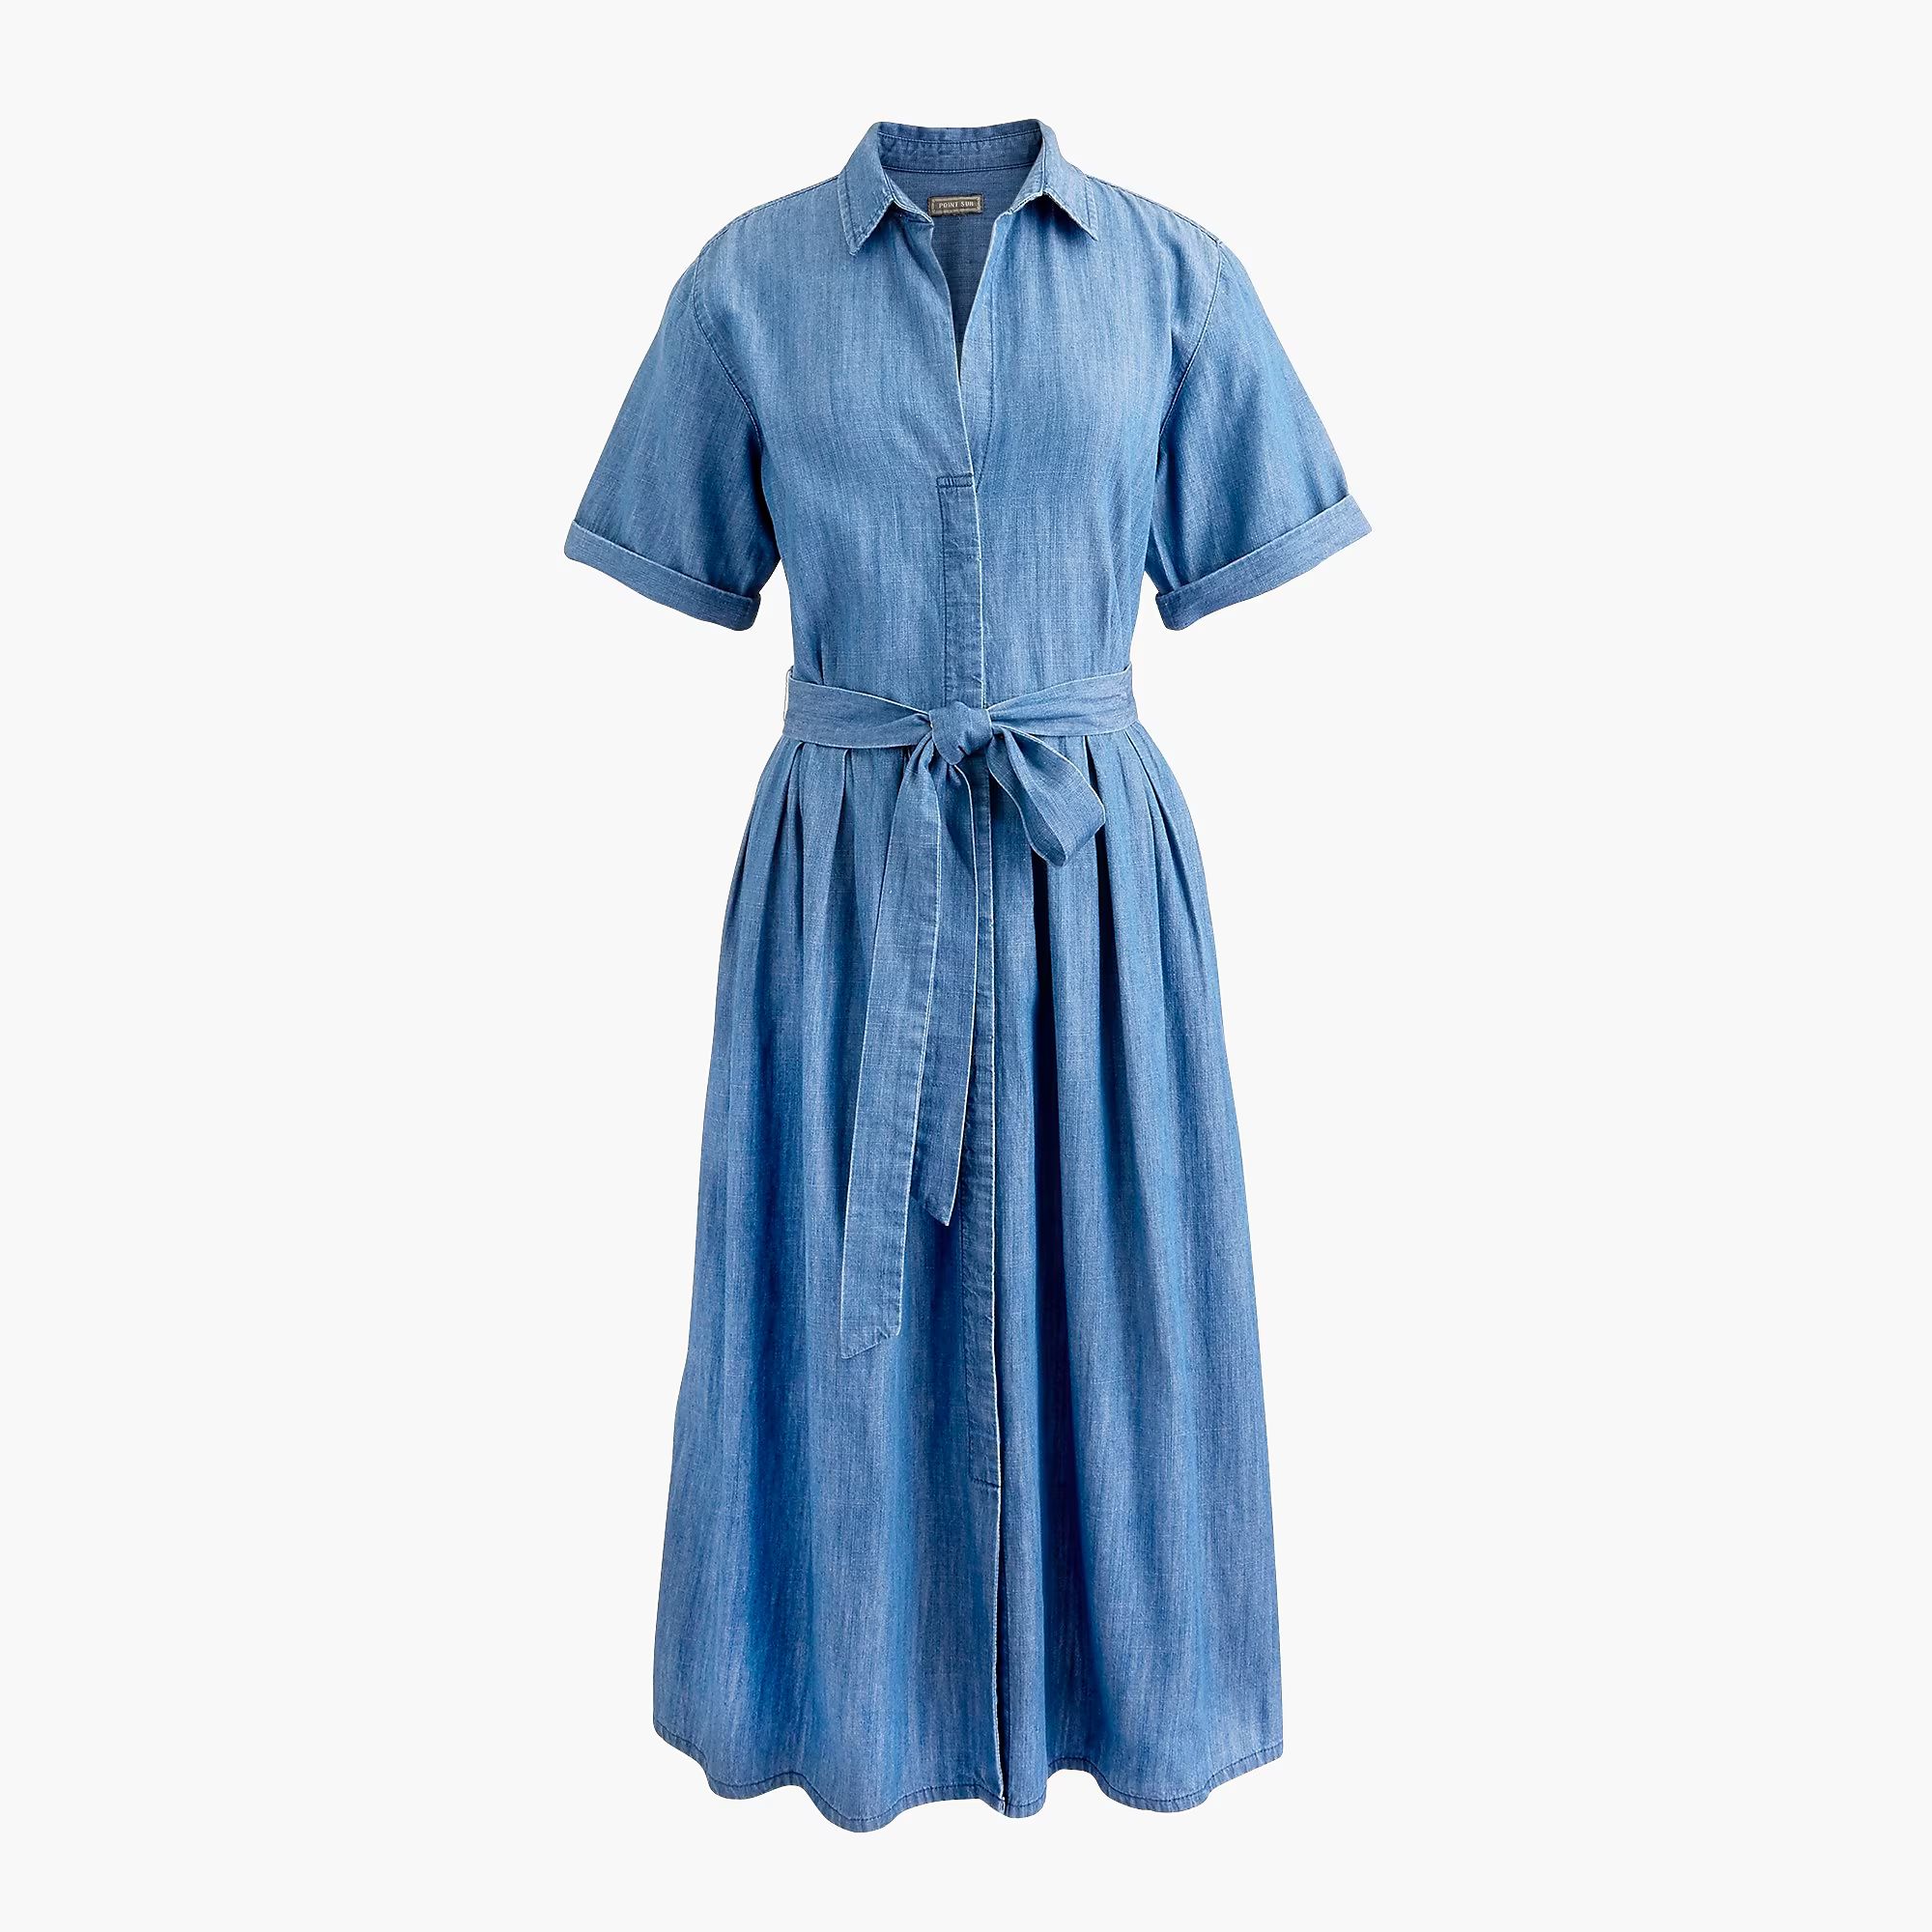 Full-skirt chambray shirtdress in cotton and TENCEL™ lyocell | J.Crew US